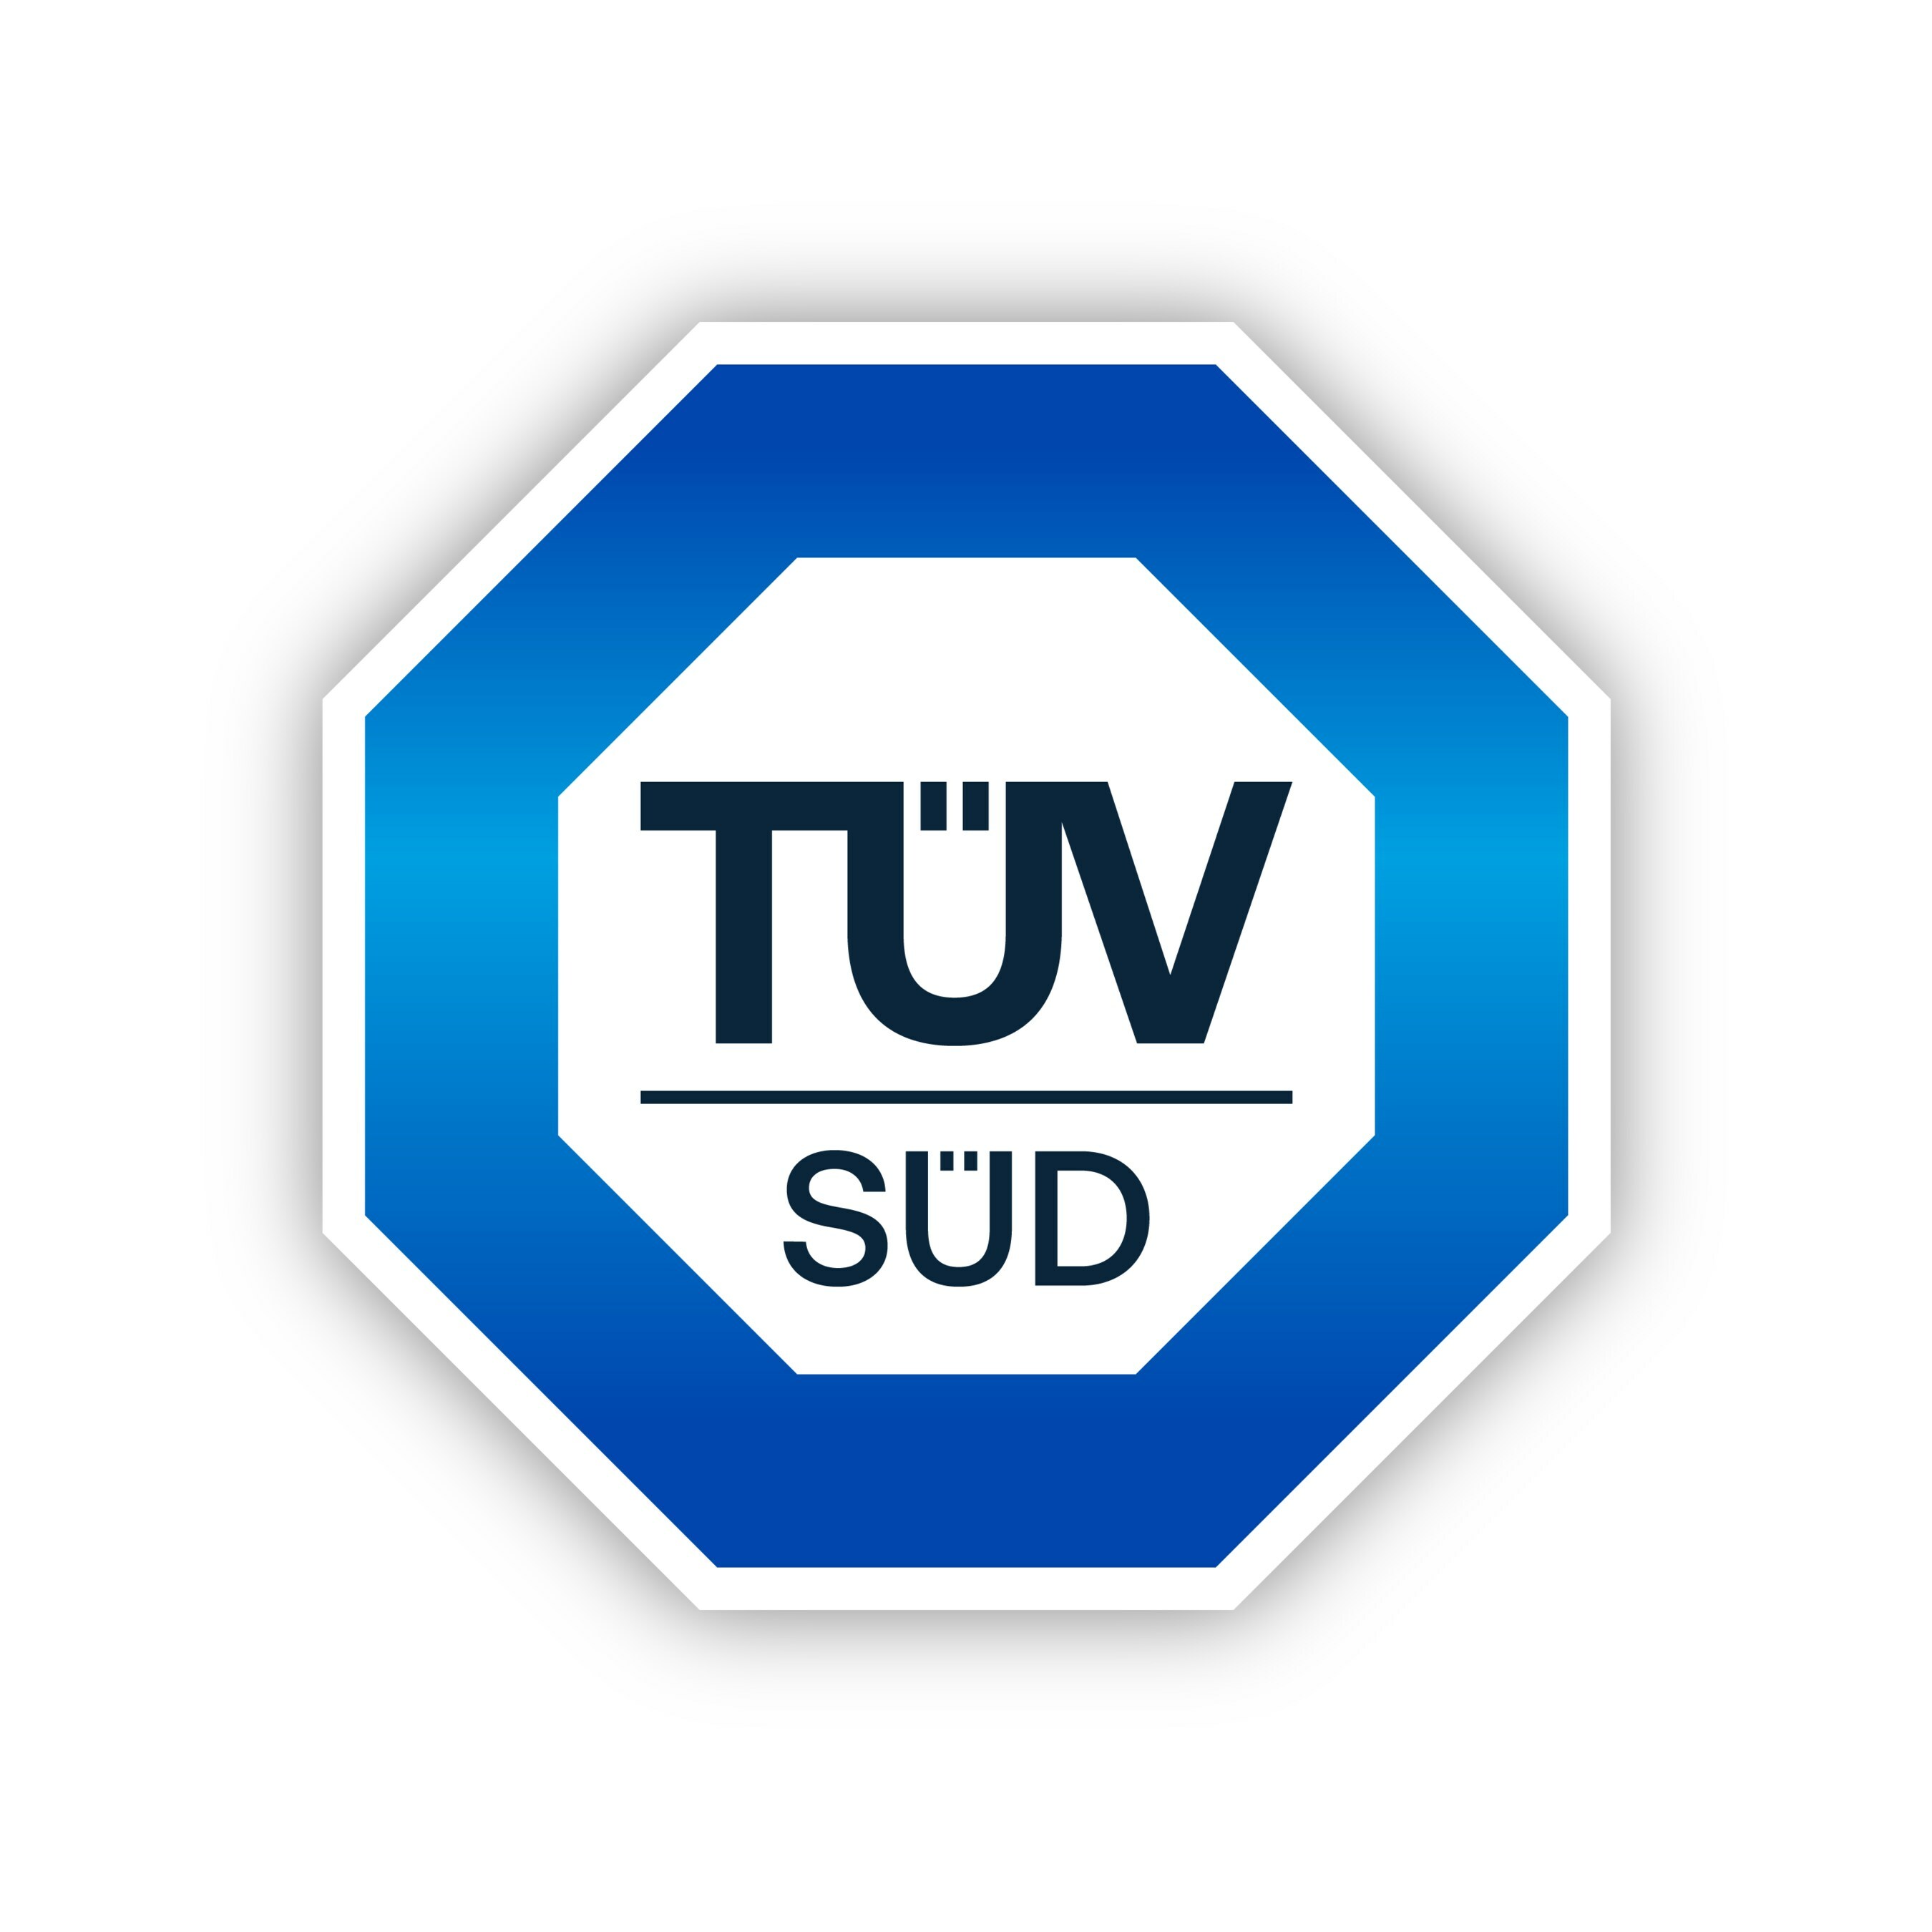 INCIT and TÜV SÜD in India team up to drive smart manufacturing across industries